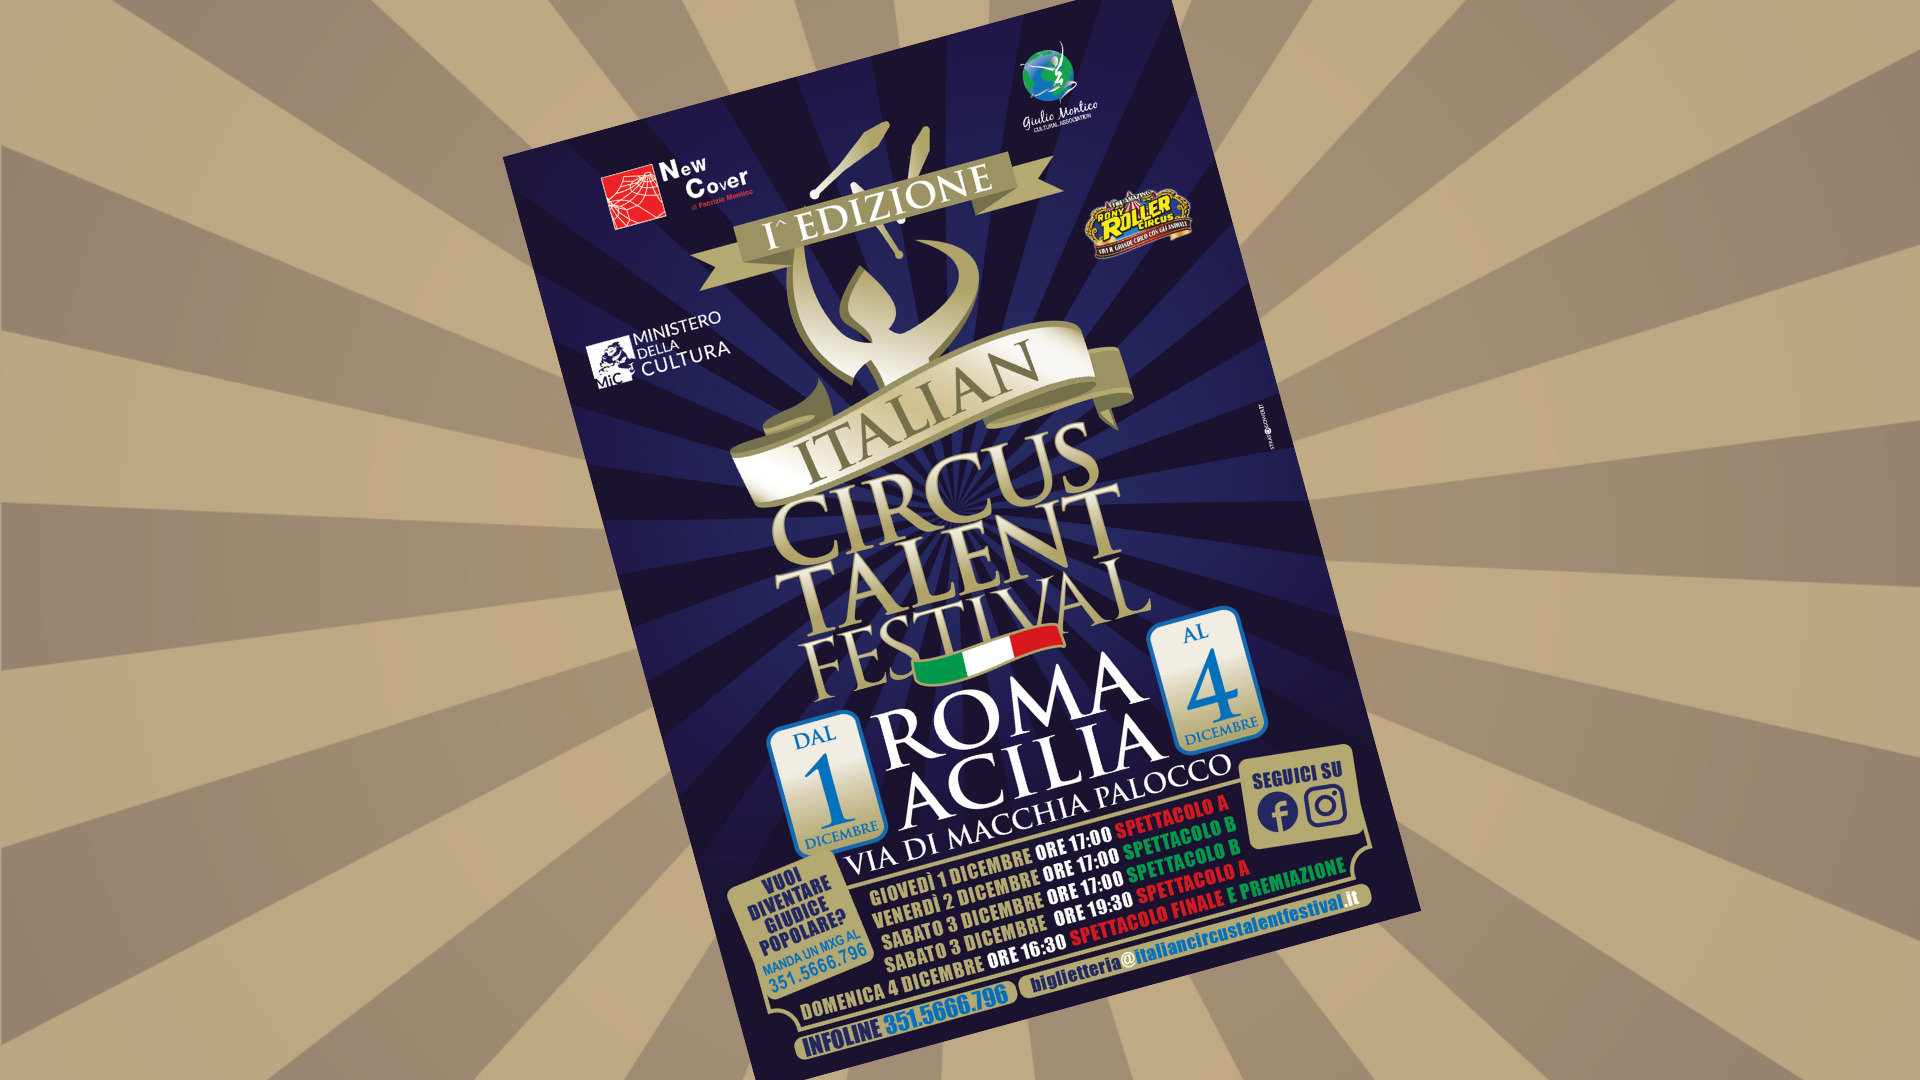 1st Edition Italian Circus Talent Festival for Youth to Open December 1st